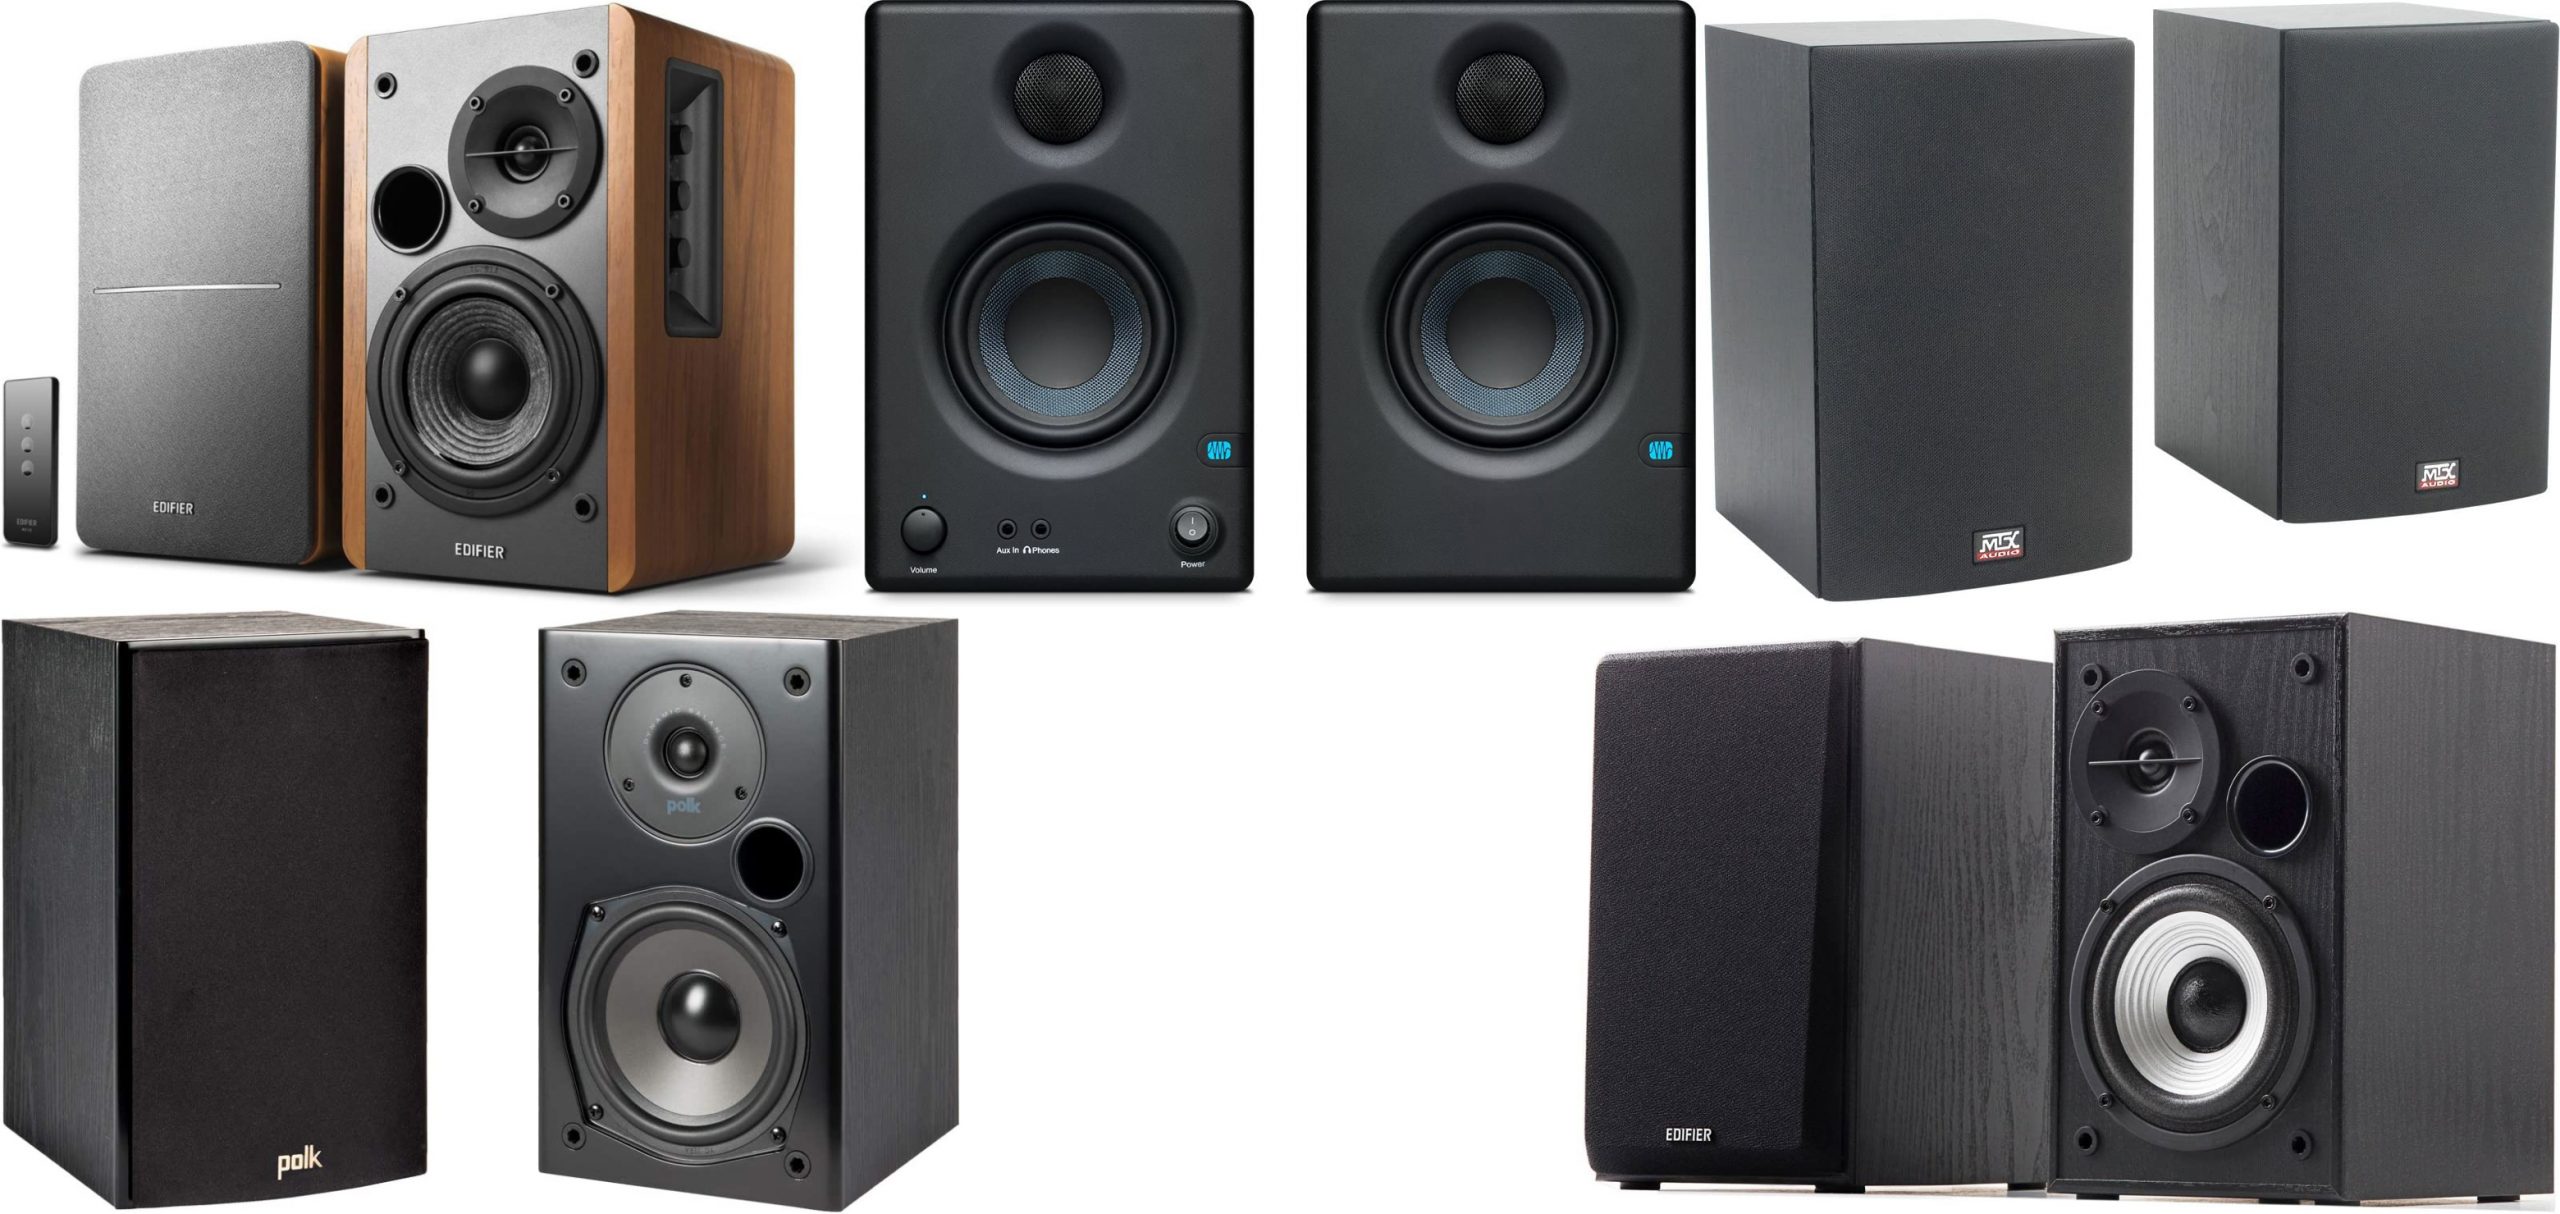 Top 5 bookshelf speakers under $100 (for a pair)